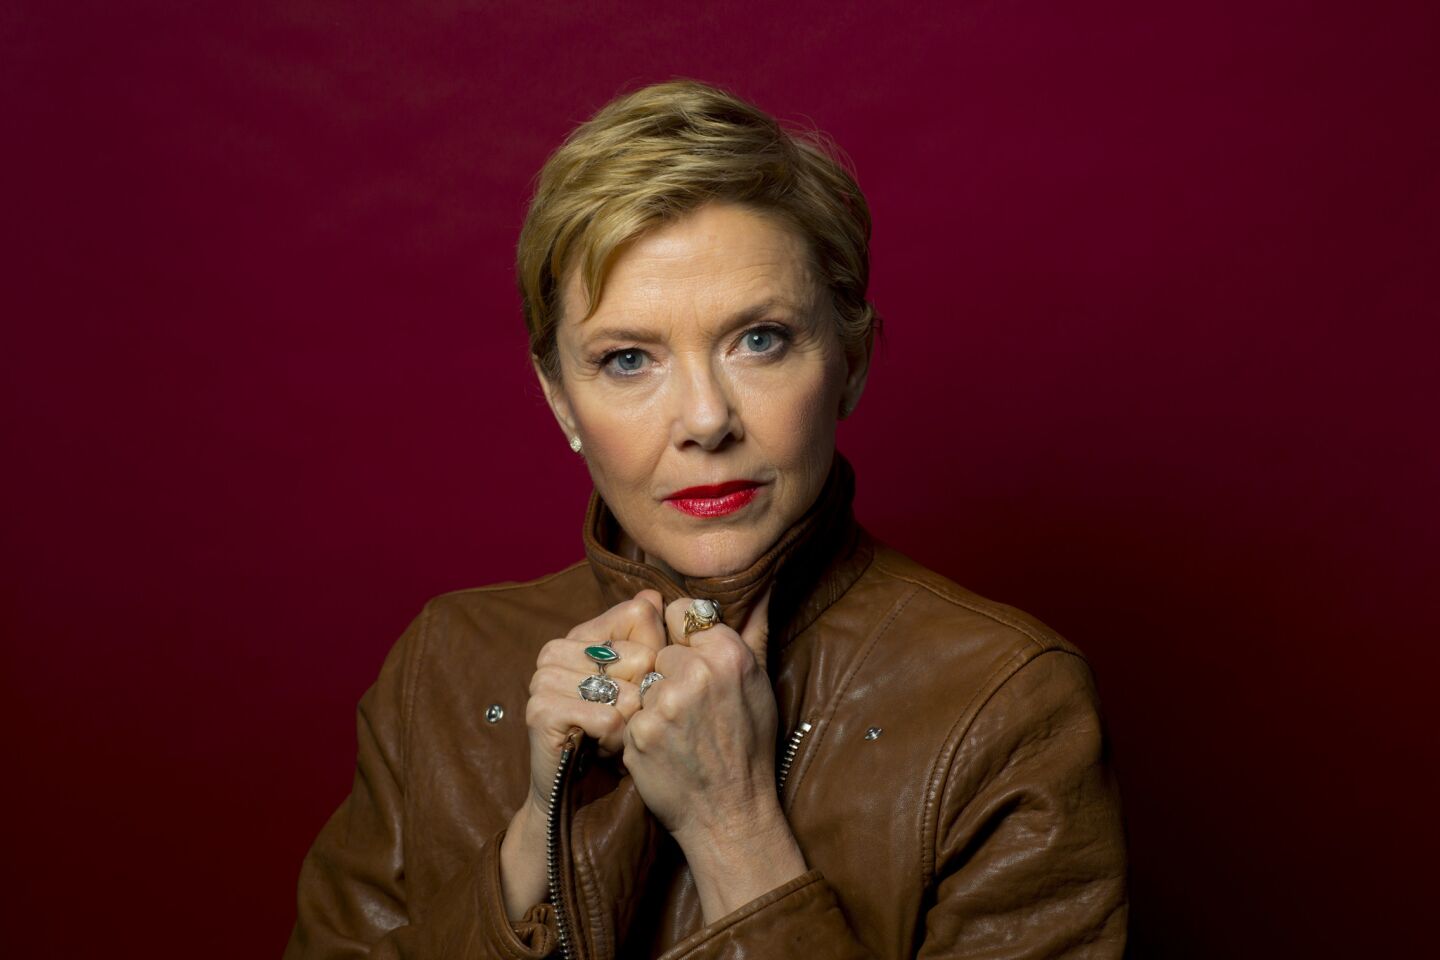 Celebrity portraits by The Times | Annette Bening